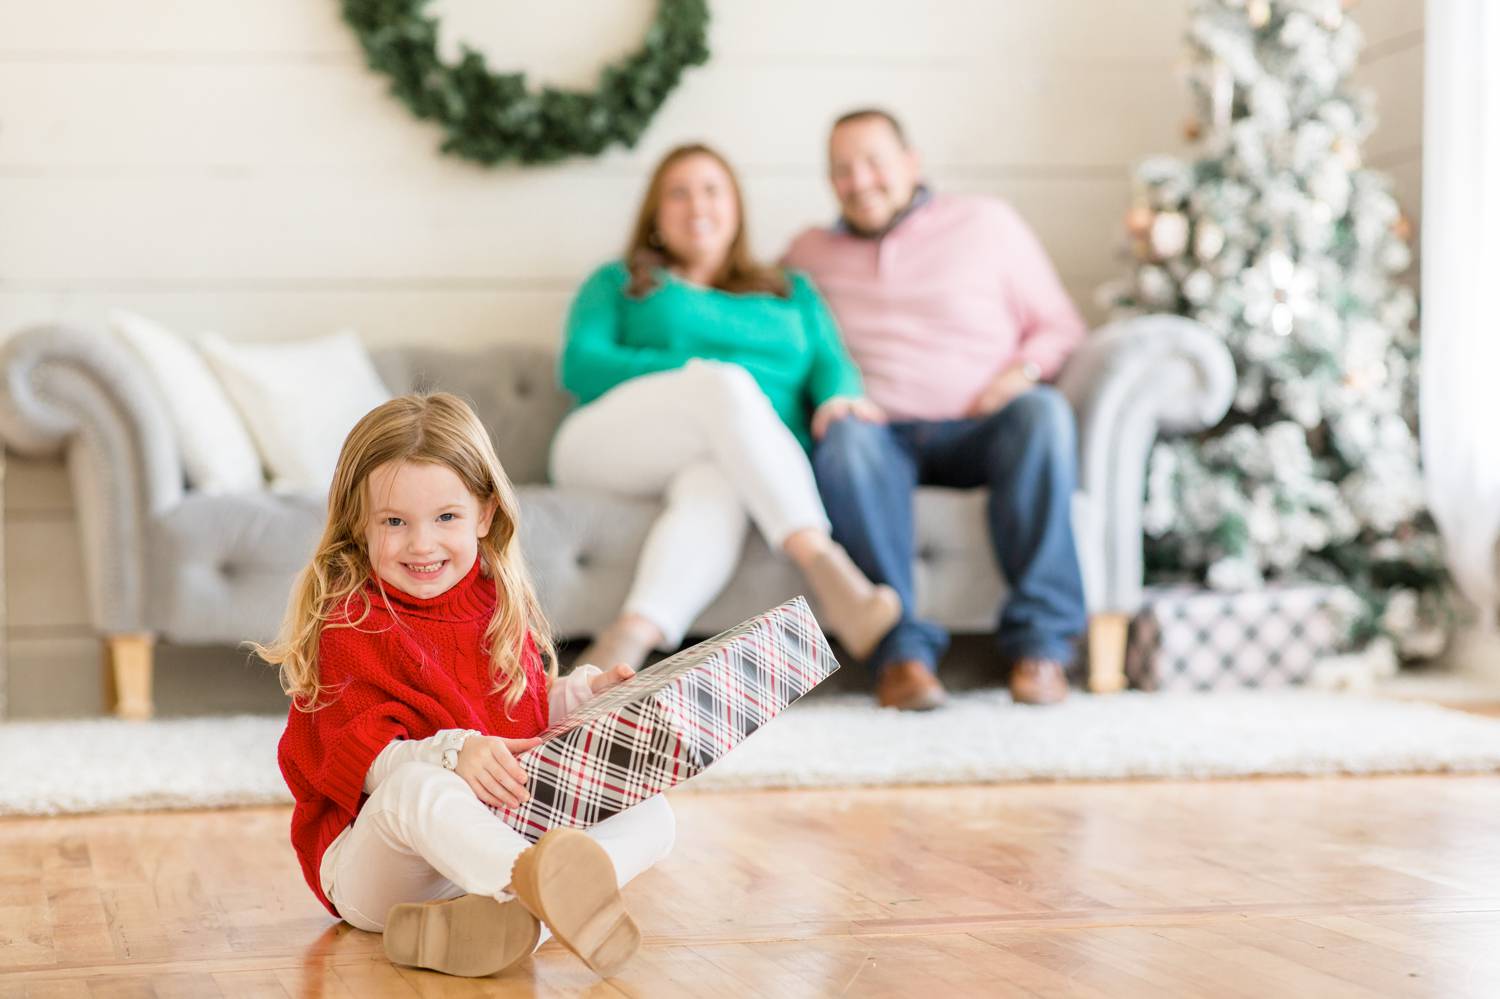 In the photo by Rebecca Rice, two parents sit on a silver sofa, blurry in the background. In the foreground and in focus, a little girls sits on the ground holding a wrapped present as she smiles at the camera. Christmas Mini Session: Ideas Families will ADORE!